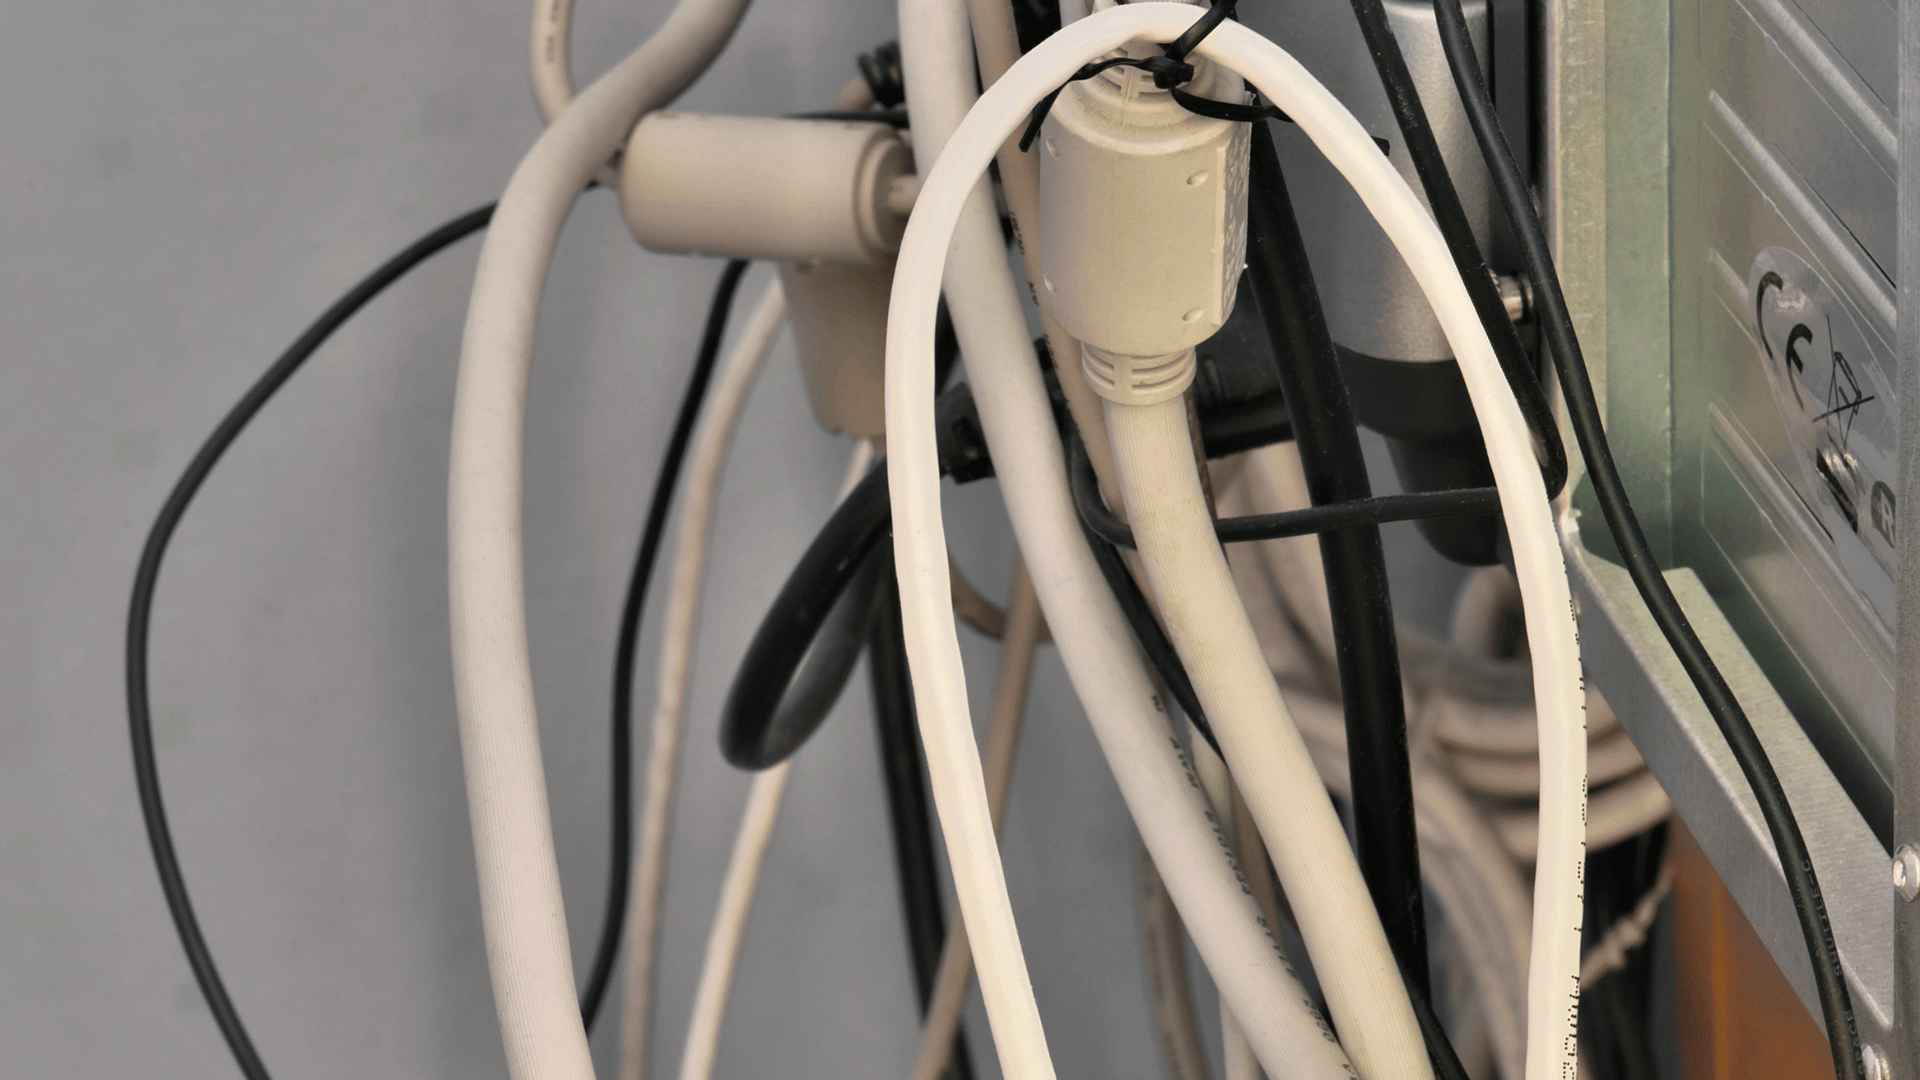 Get Your Cables Under Control This Weekend